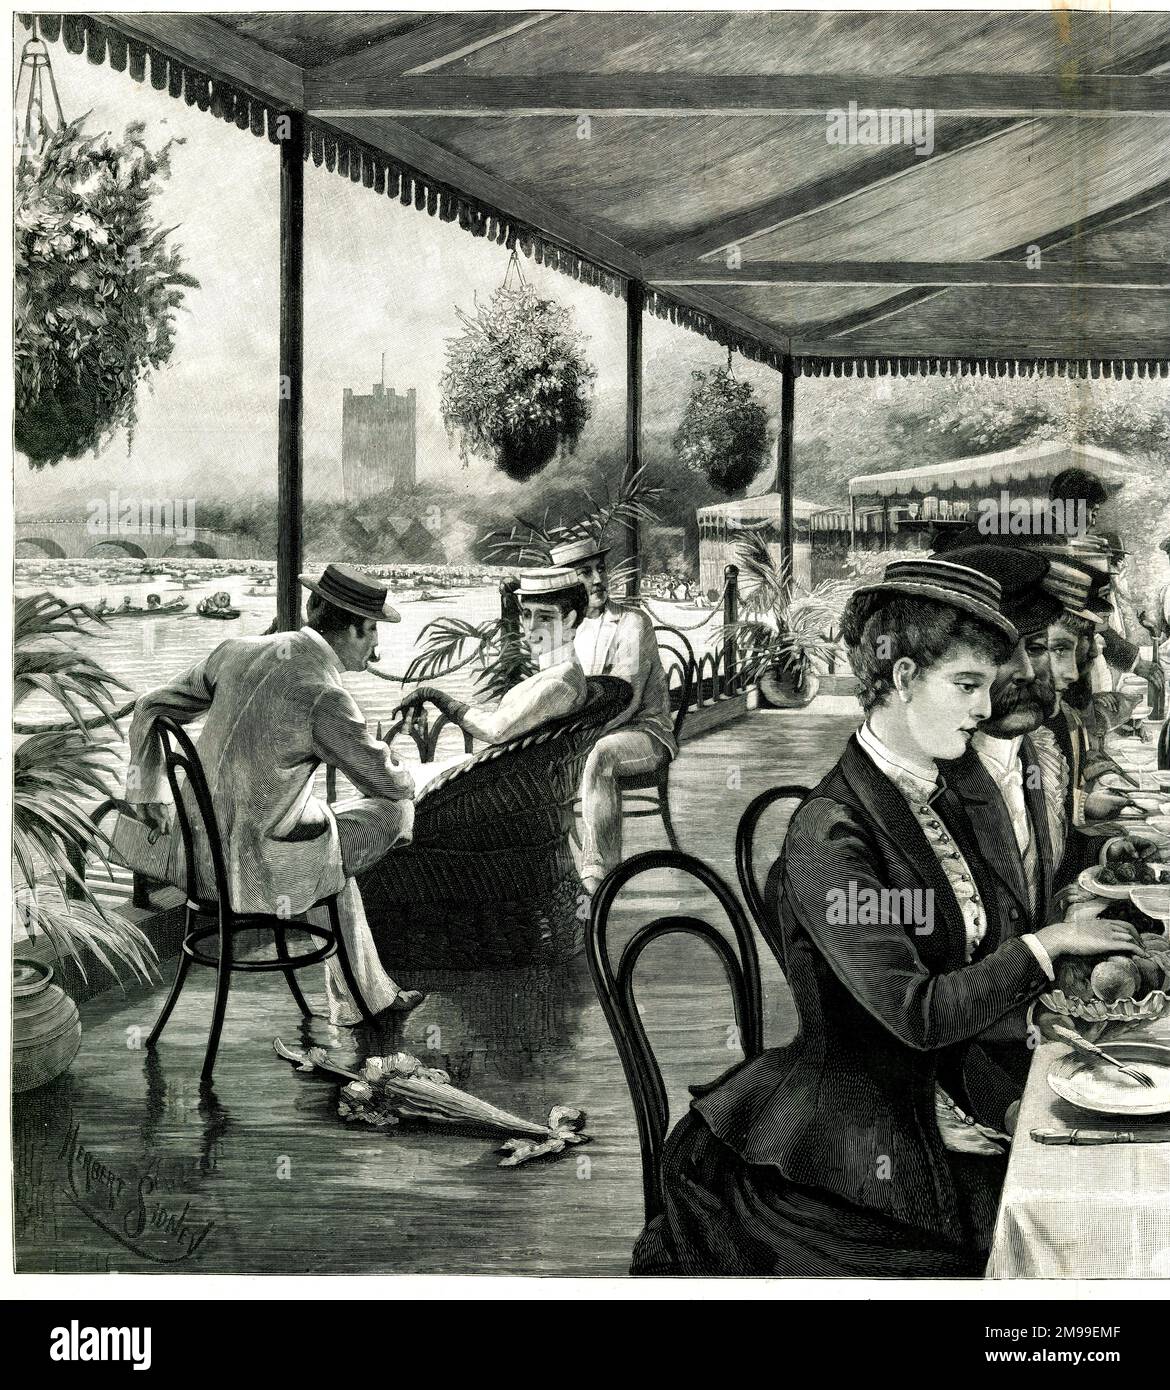 A Luncheon Party on a Houseboat at Henley-on-Thames. Stock Photo